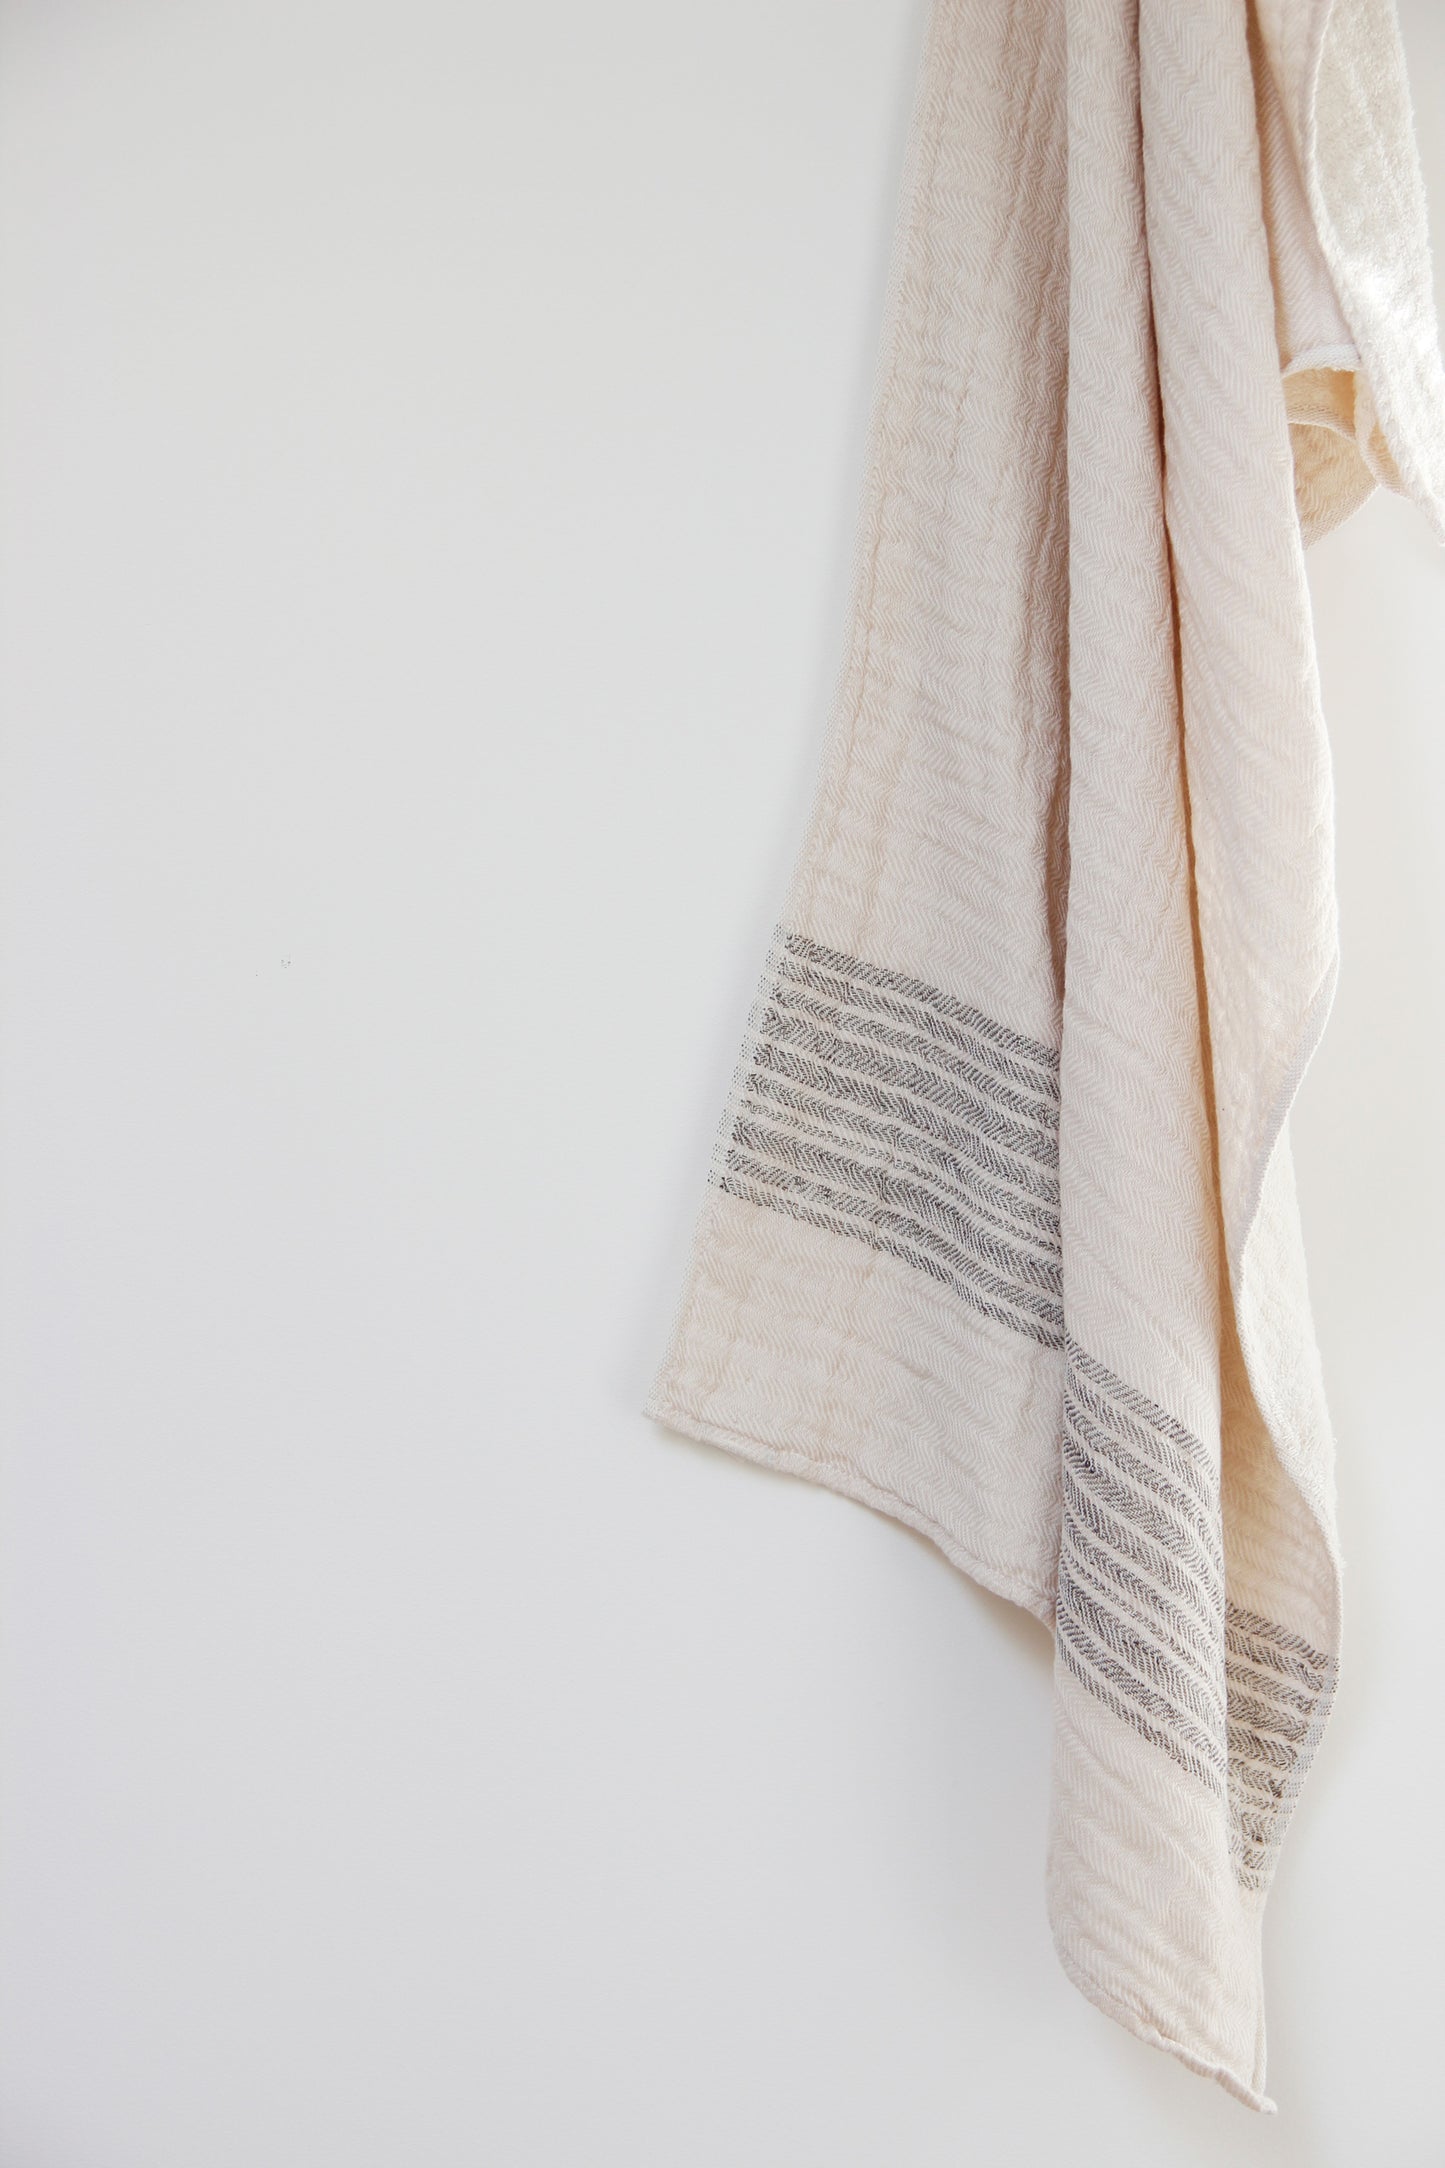 Flax pink creme - Cotton Terry Towel